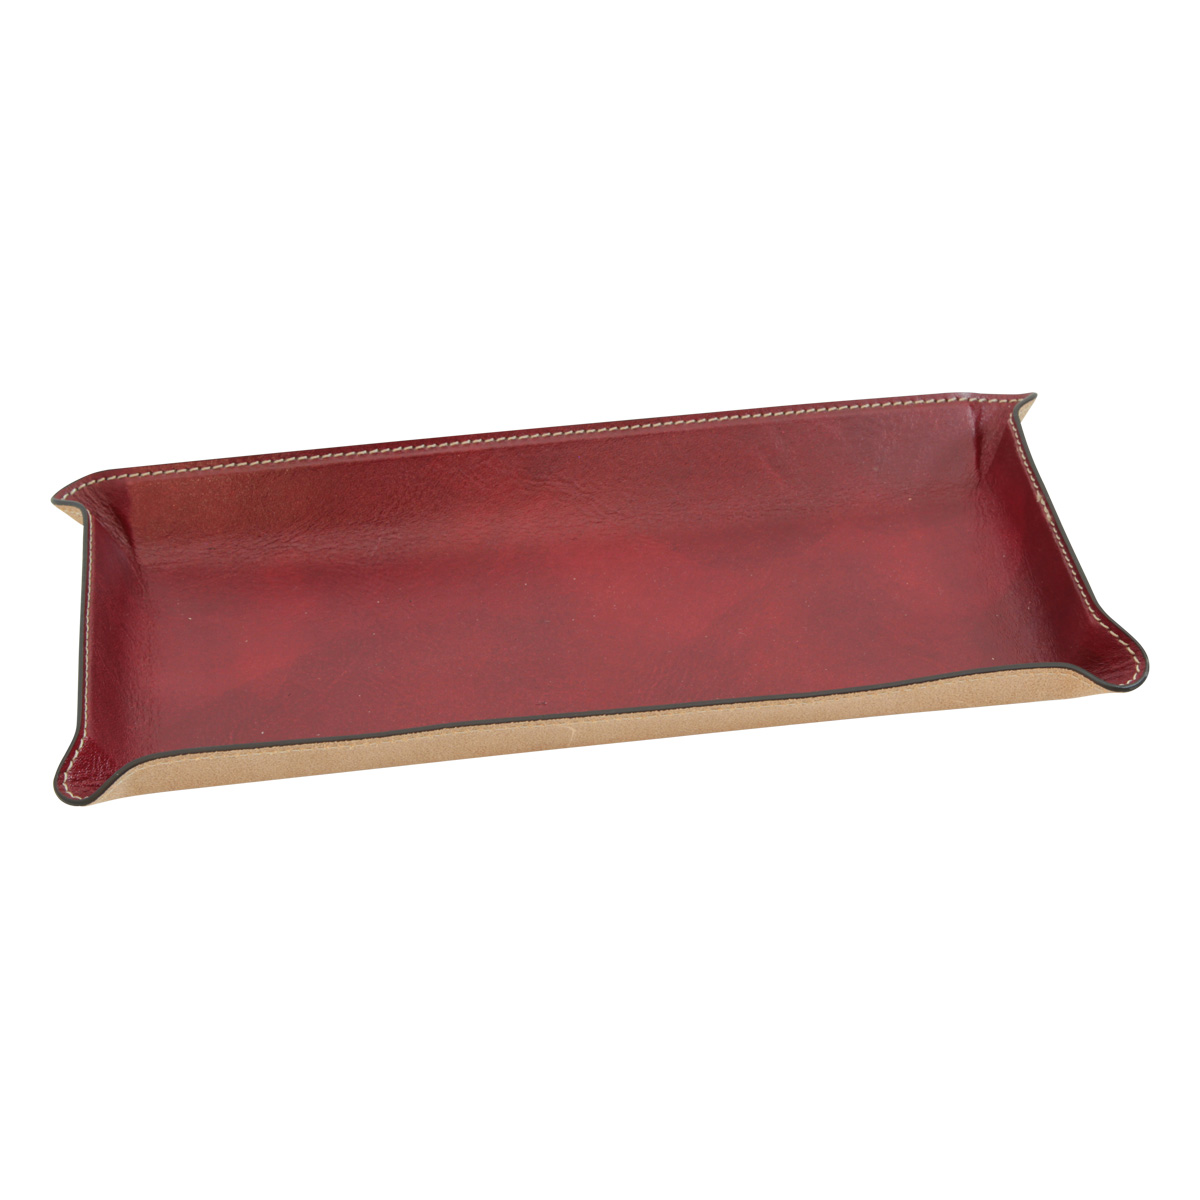 Leather desk tray - red | 762089RO UK | Old Angler Firenze